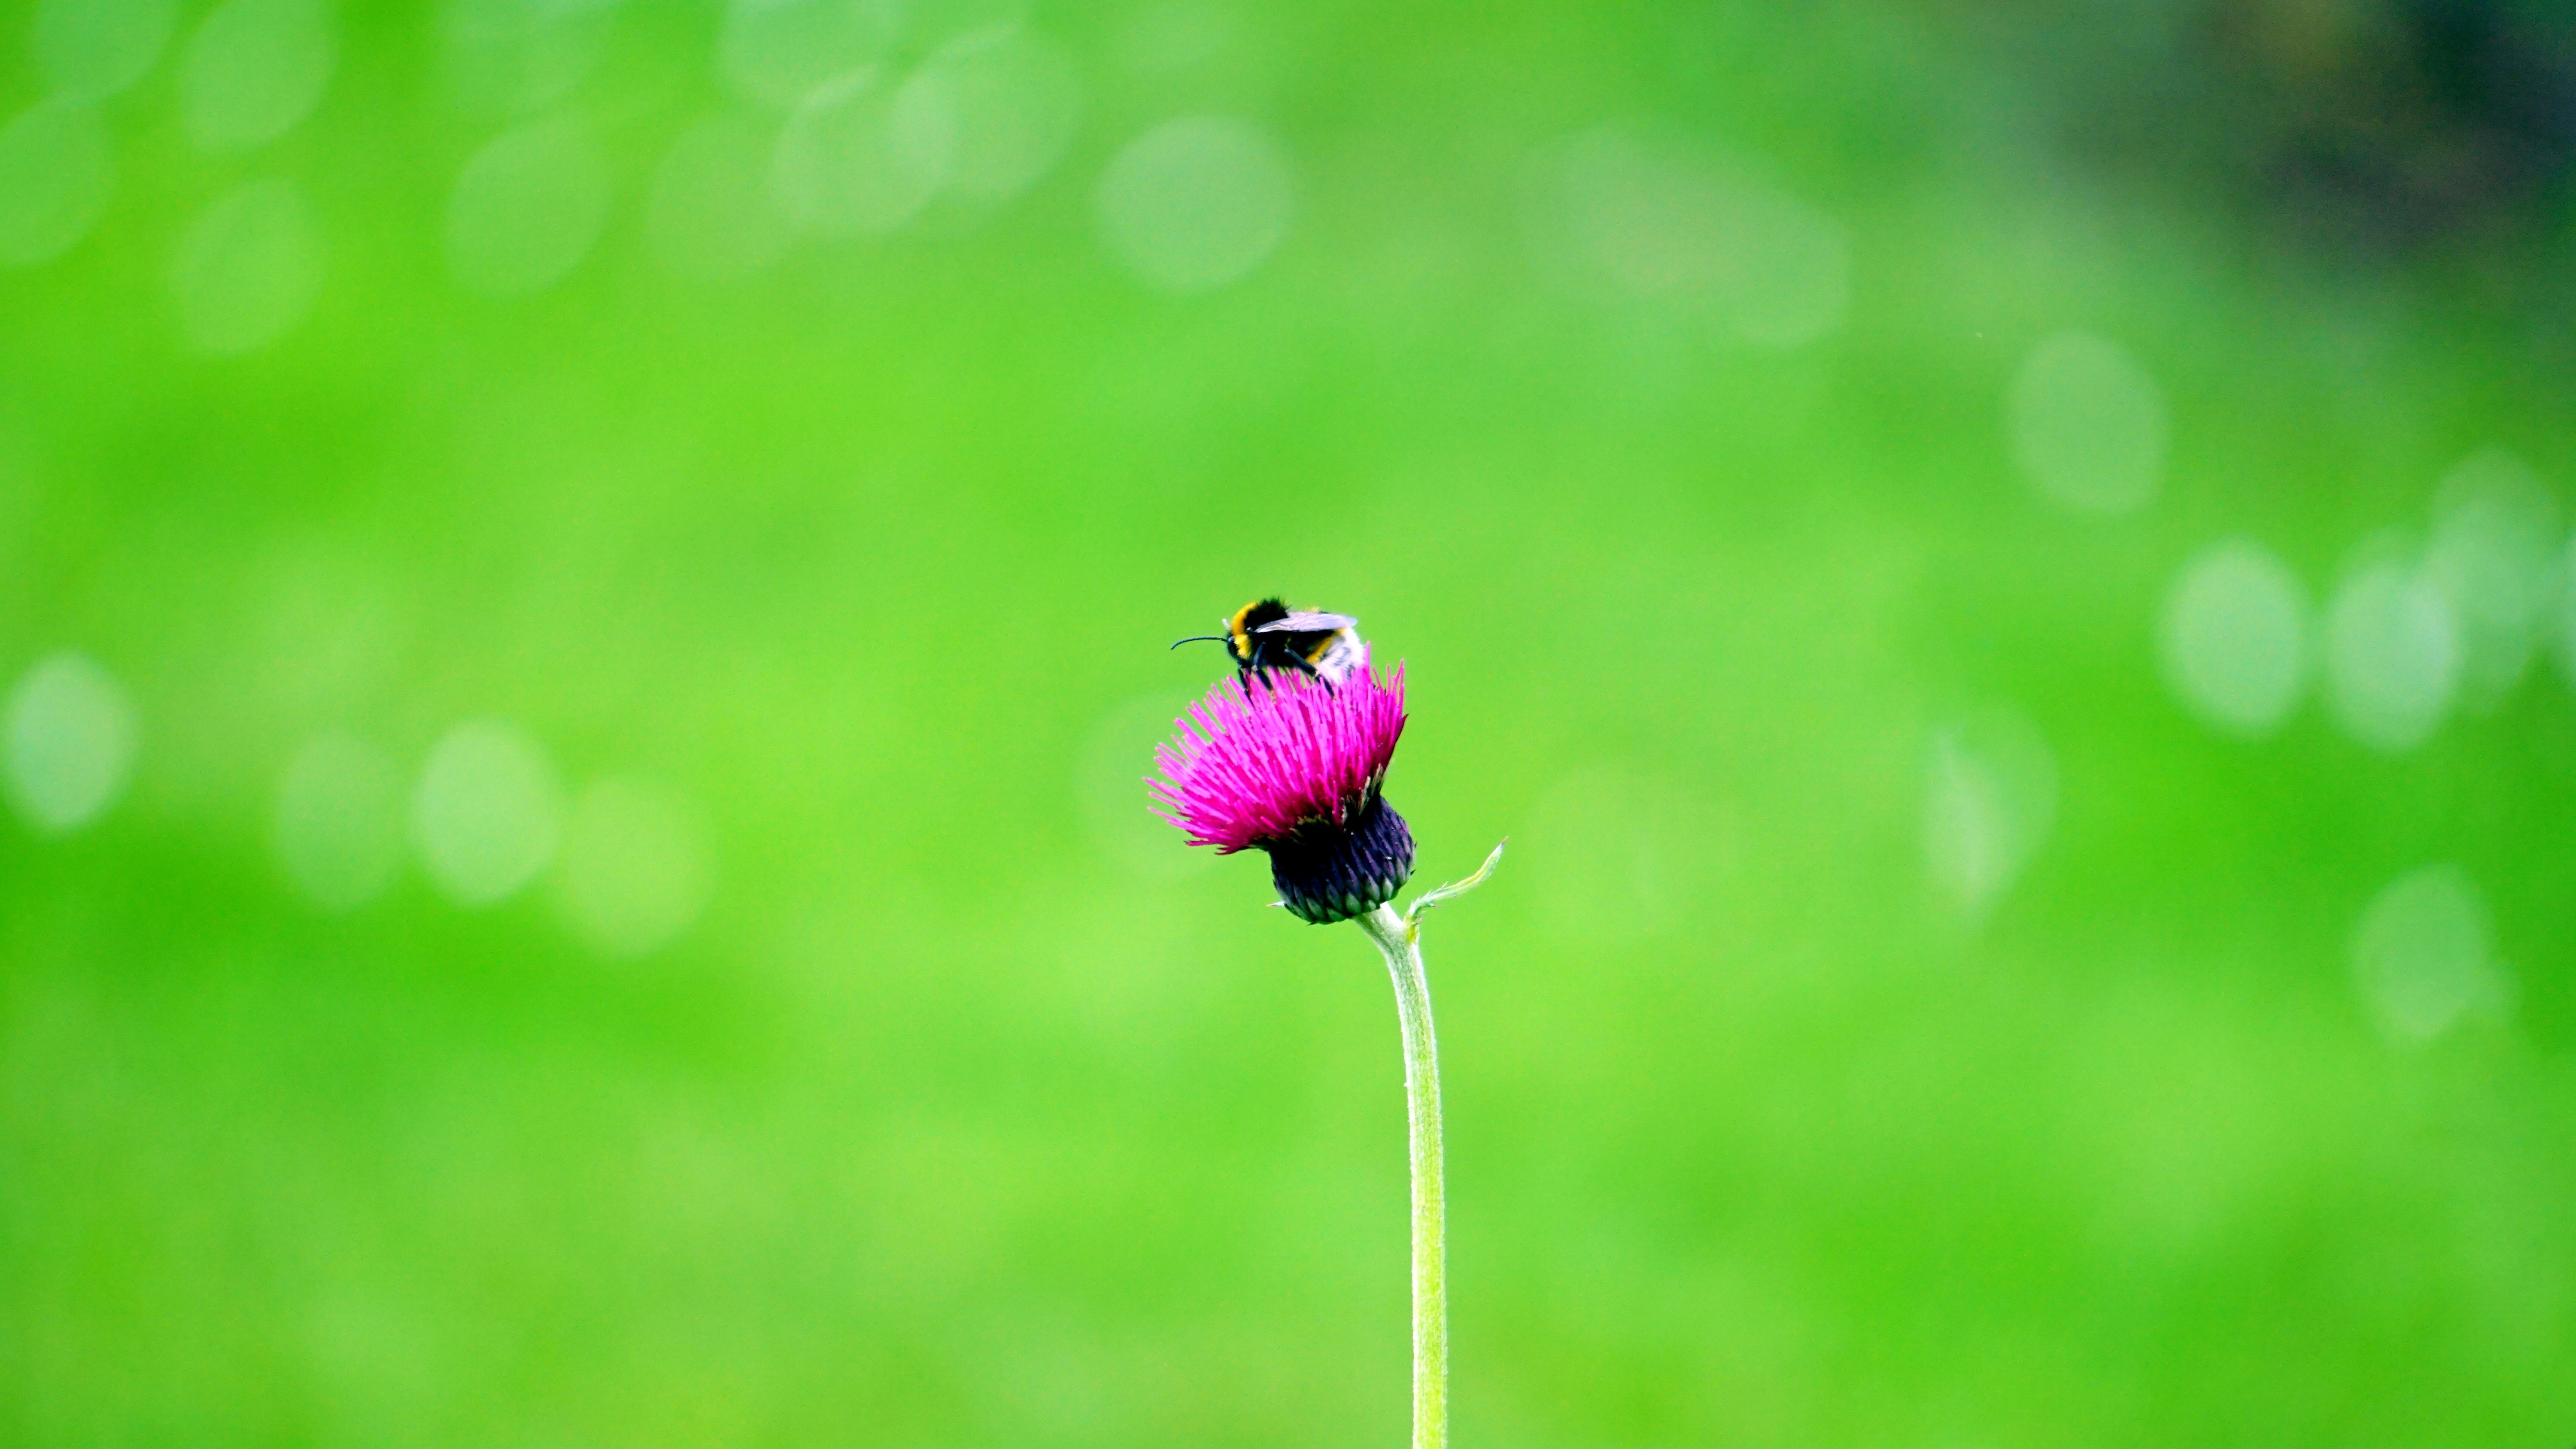 130183 download wallpaper flower, macro, bud, bee screensavers and pictures for free